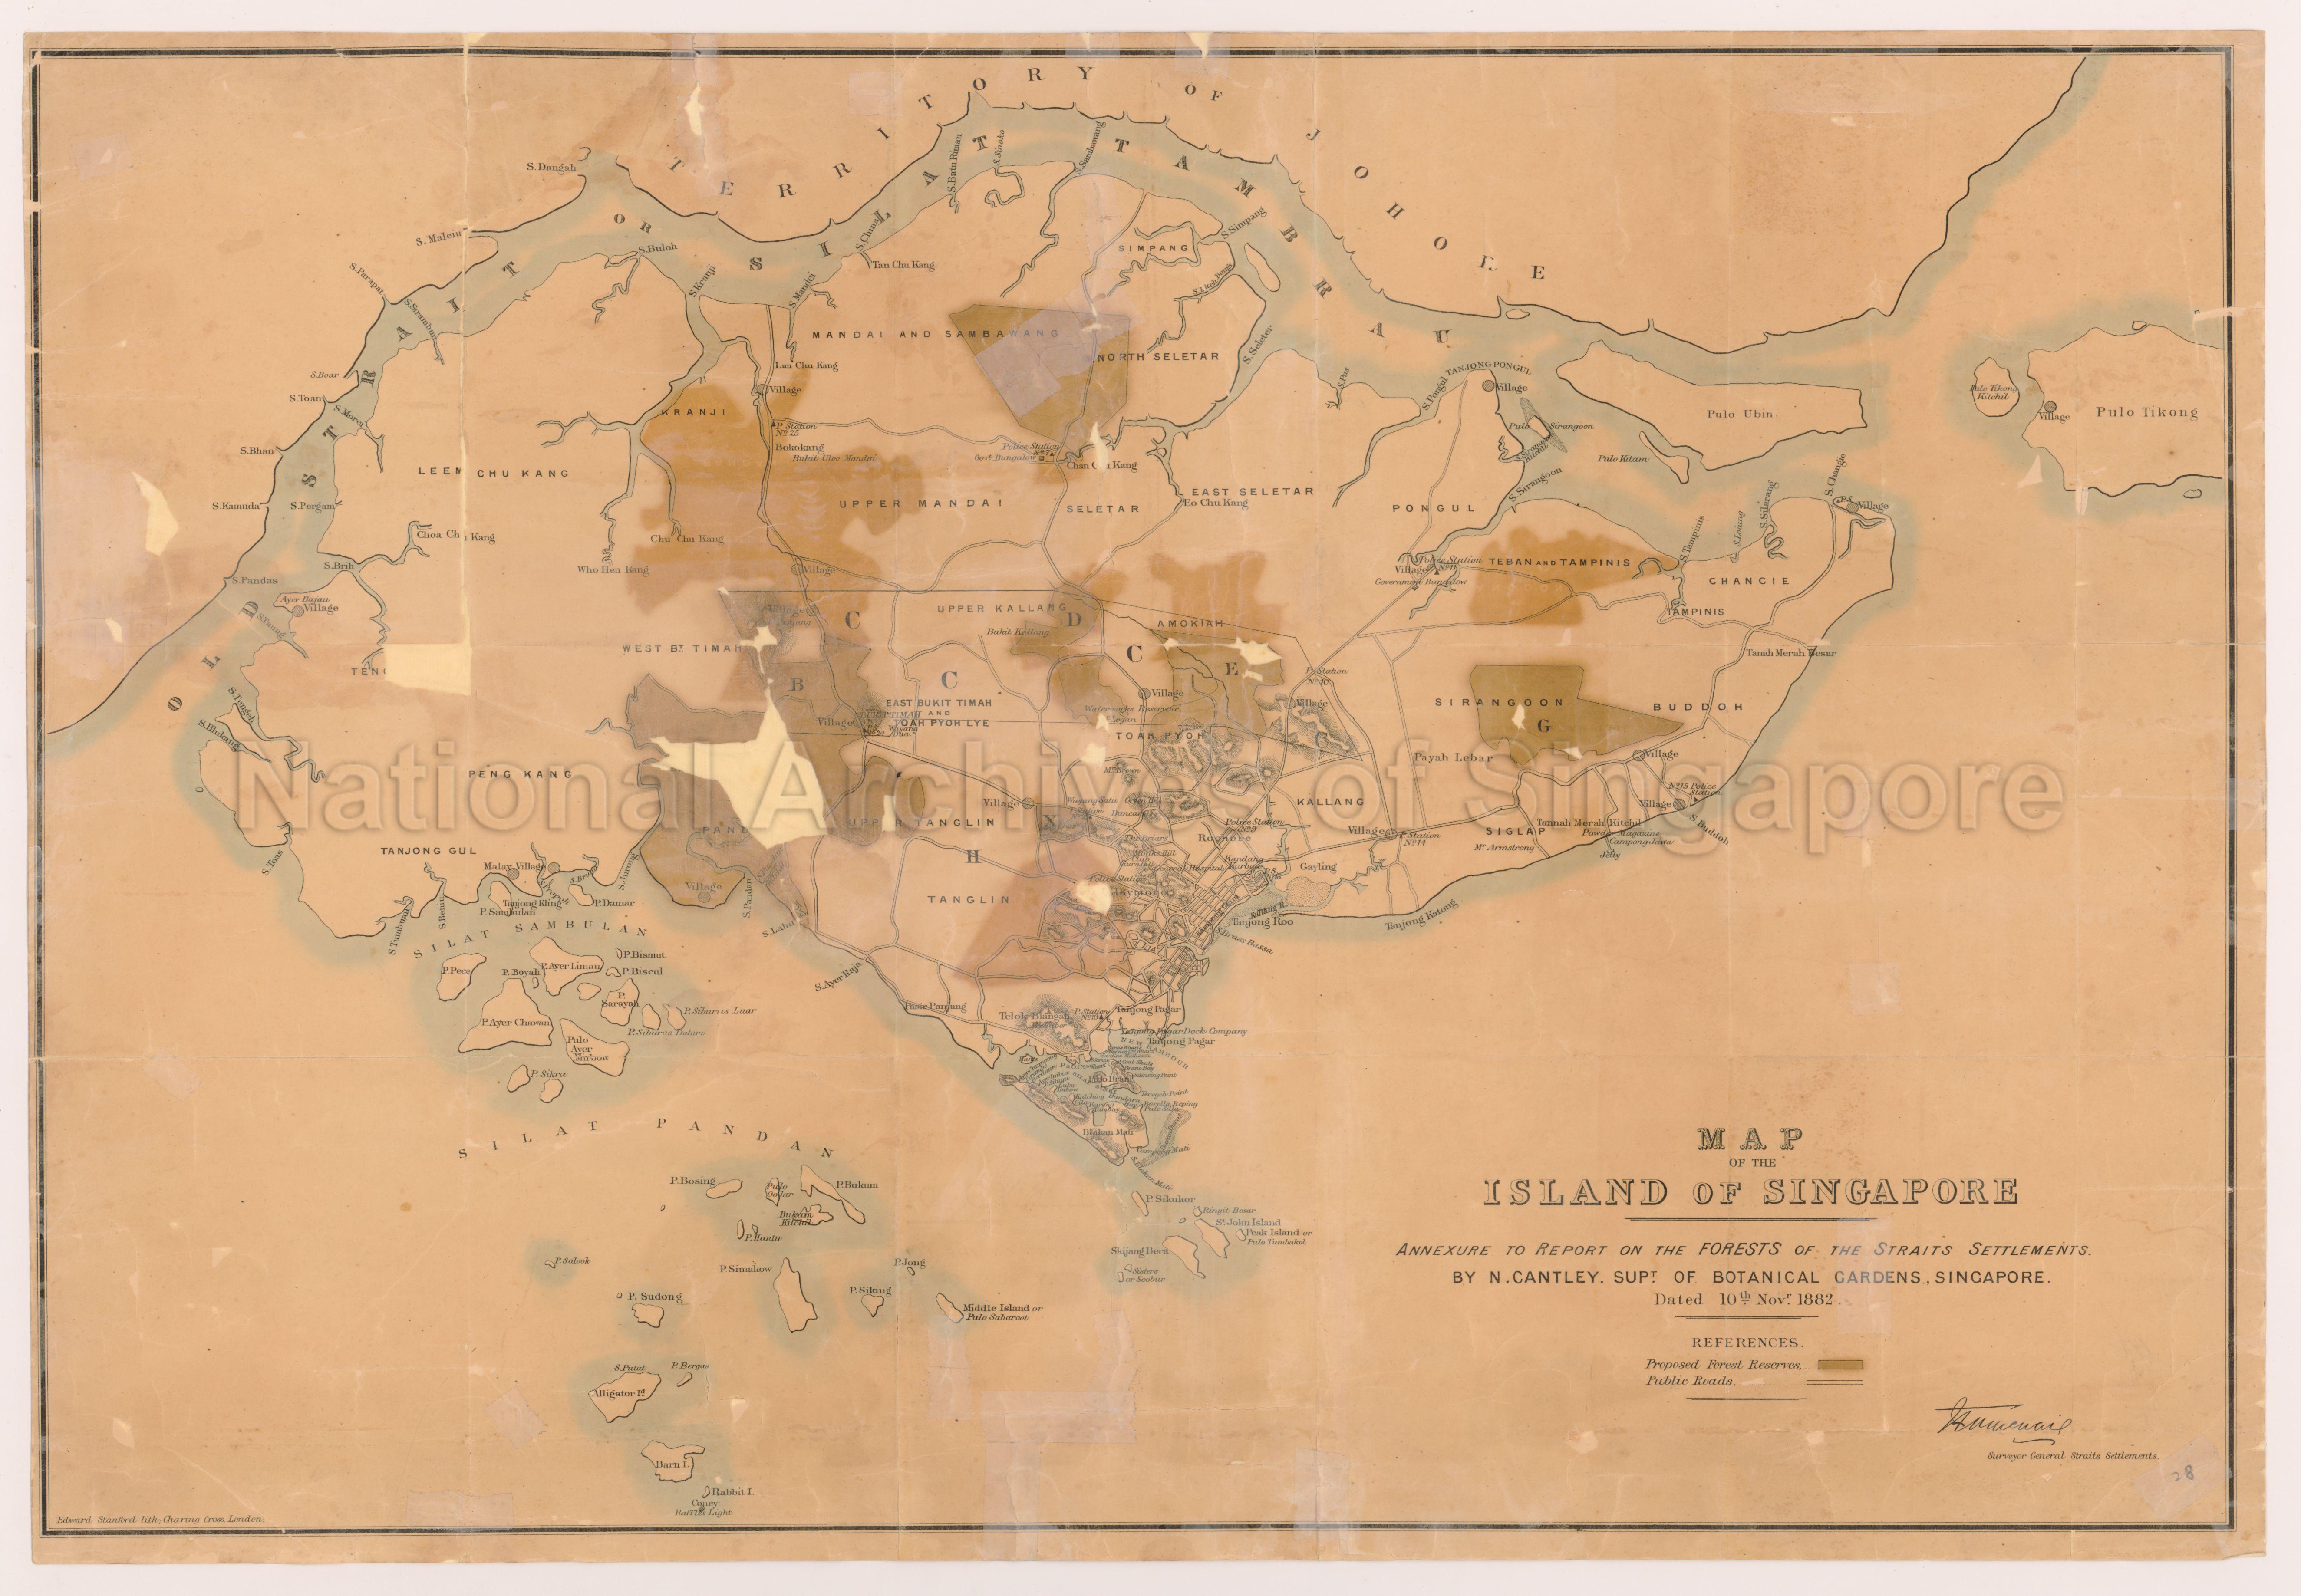 Map Of The Island Of Singapore. Annexure To Report On The  …